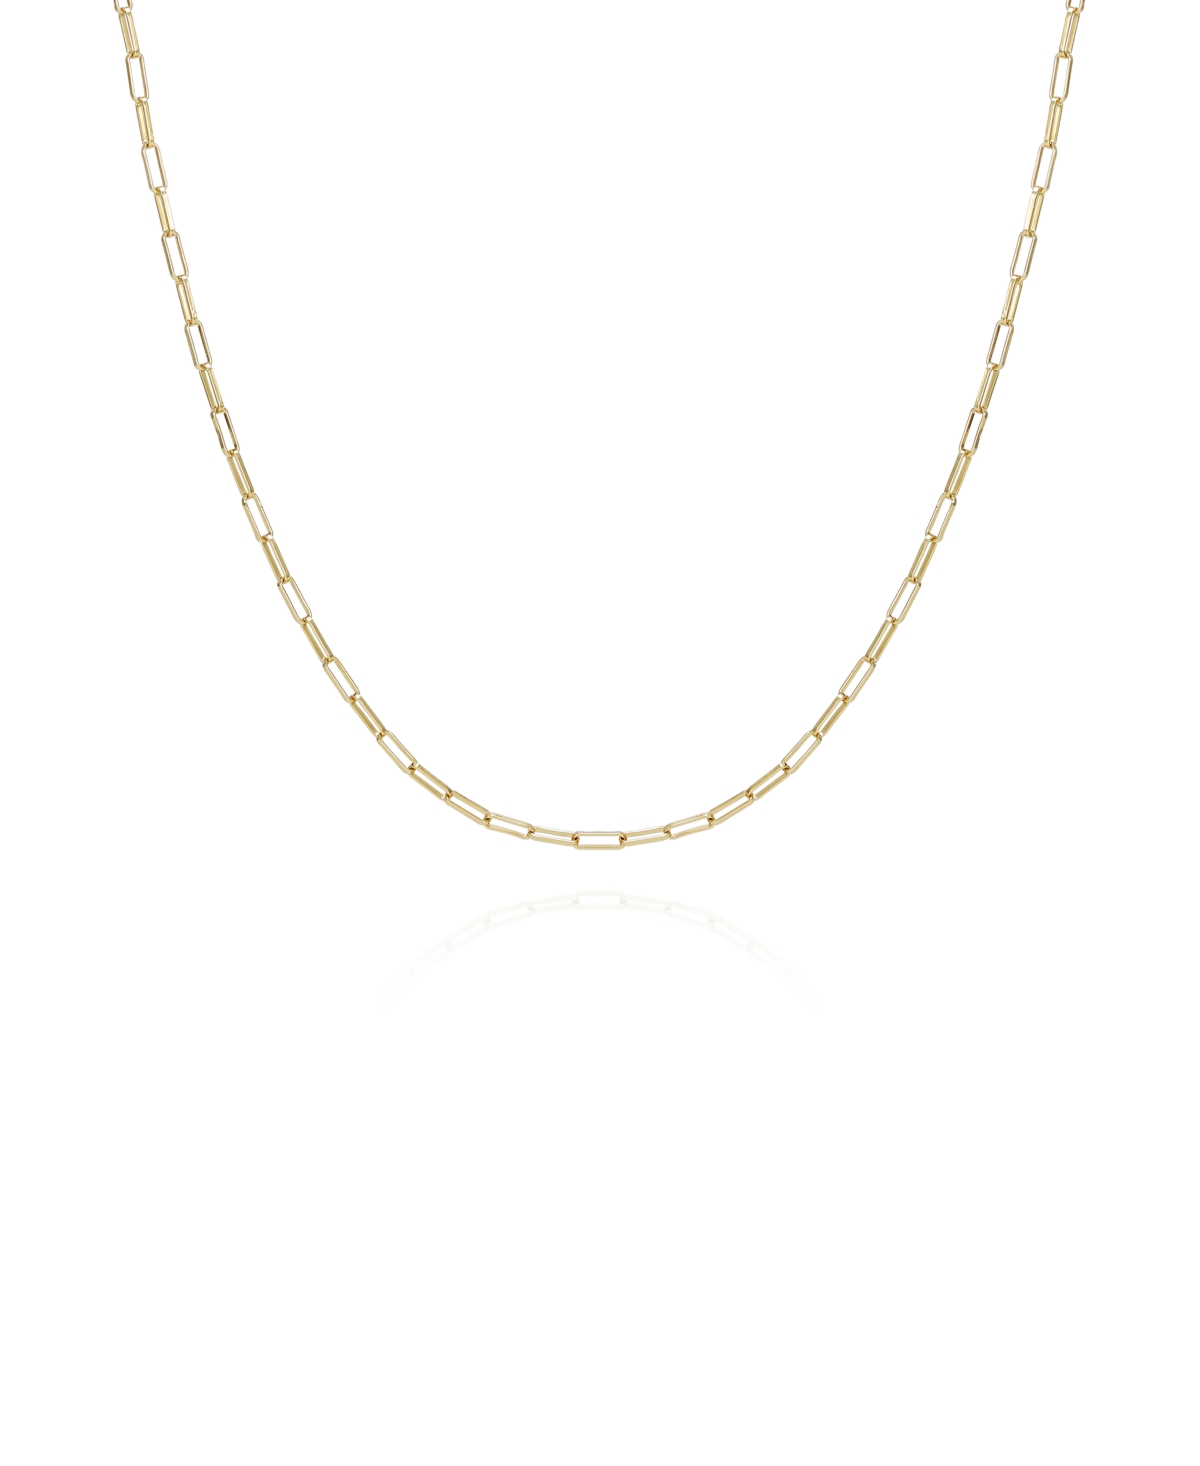 Vince Camuto Gold-tone Paper Clip Chain Link Necklace